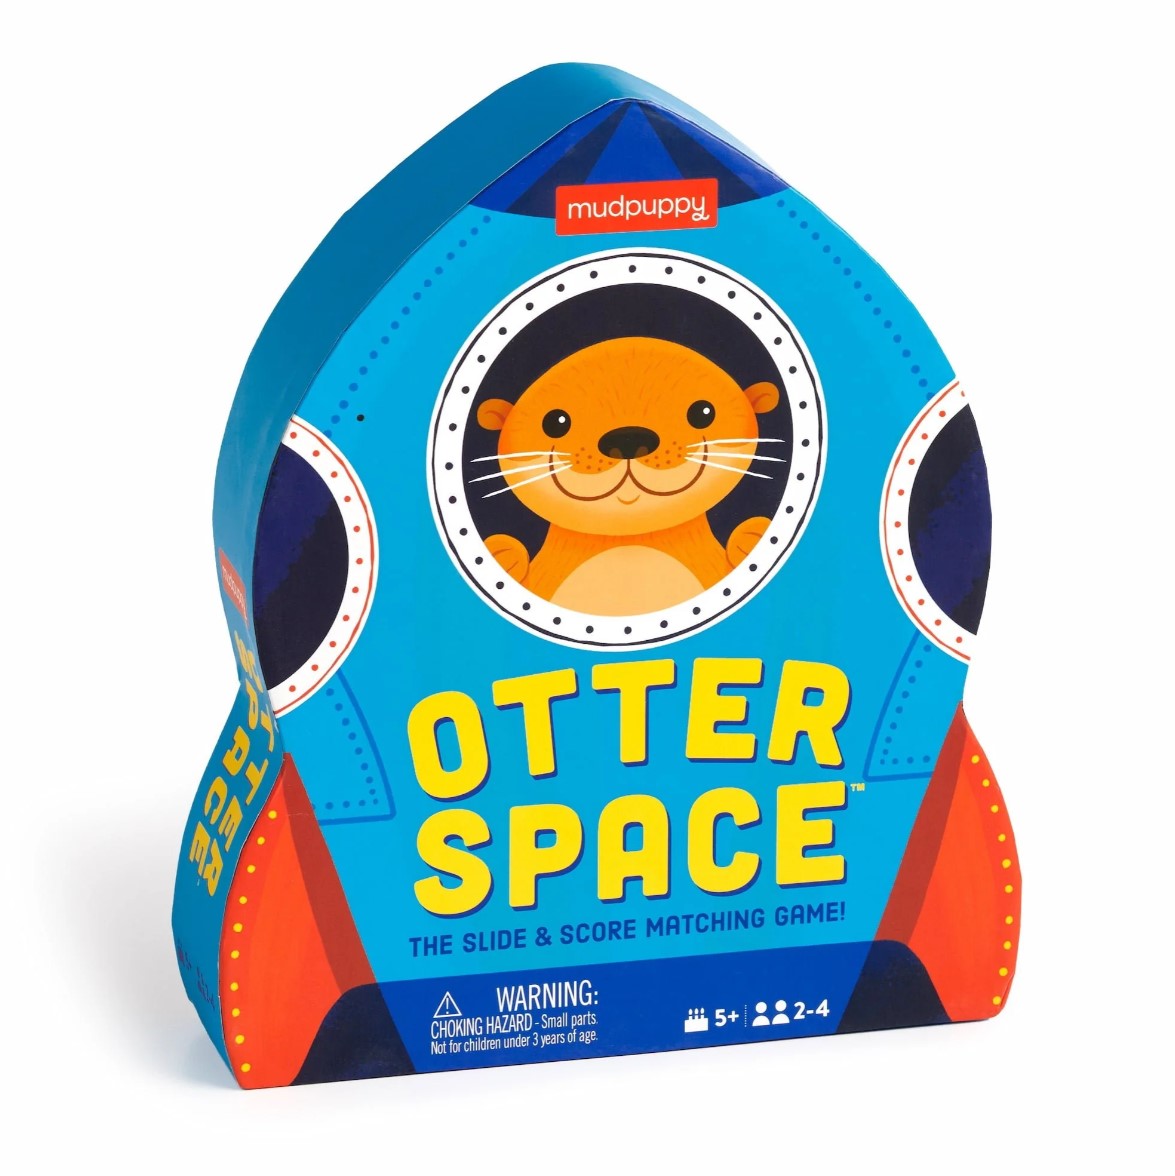 MP Otter Space Shaped Game (7711388139719)